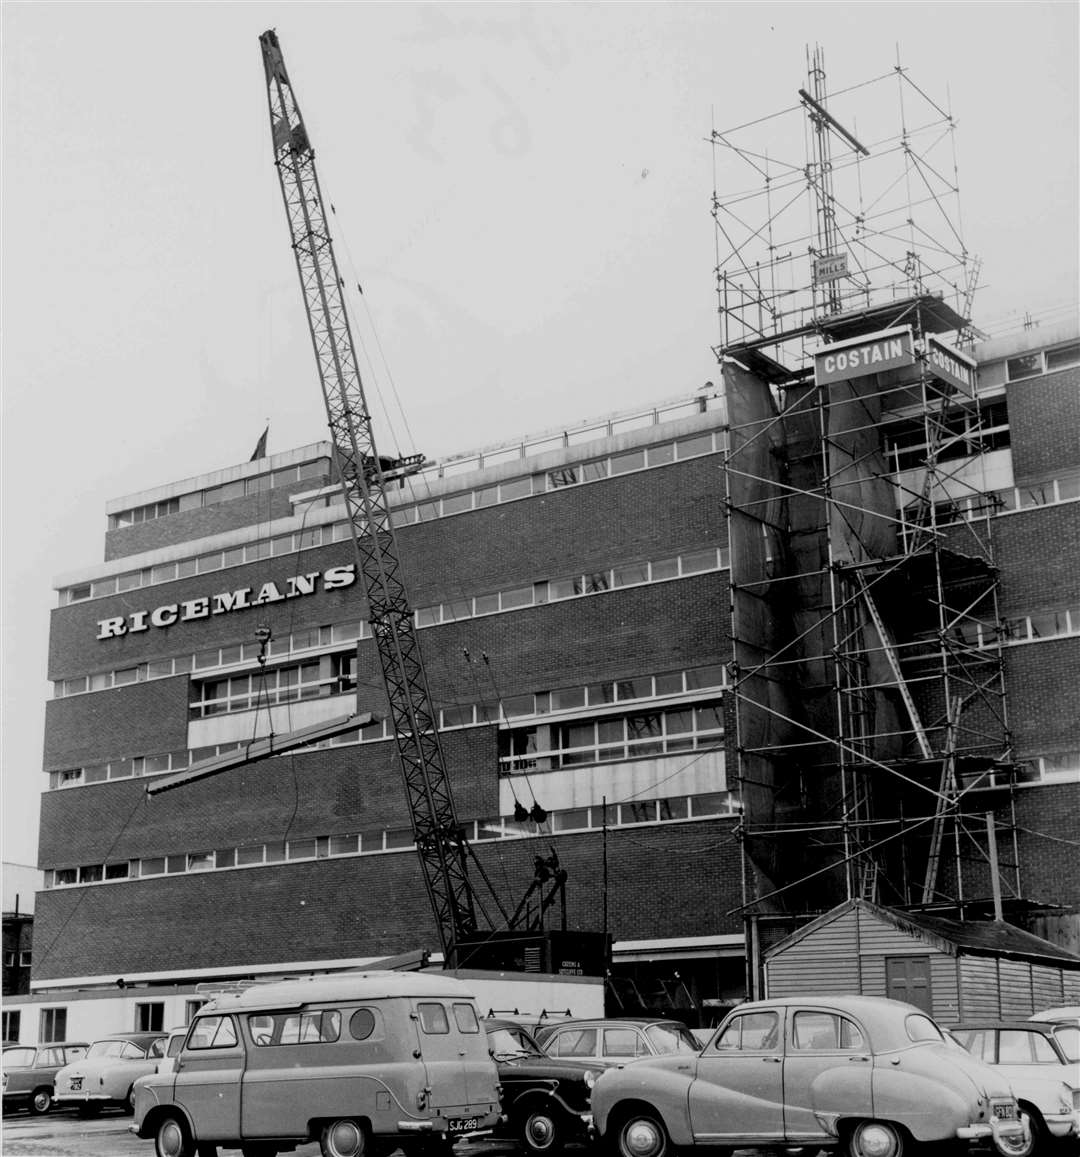 Renovation work at Ricemans department store in Canterbury in June 1963 after the spectacular fire of March that year, when the top floor was badly damaged